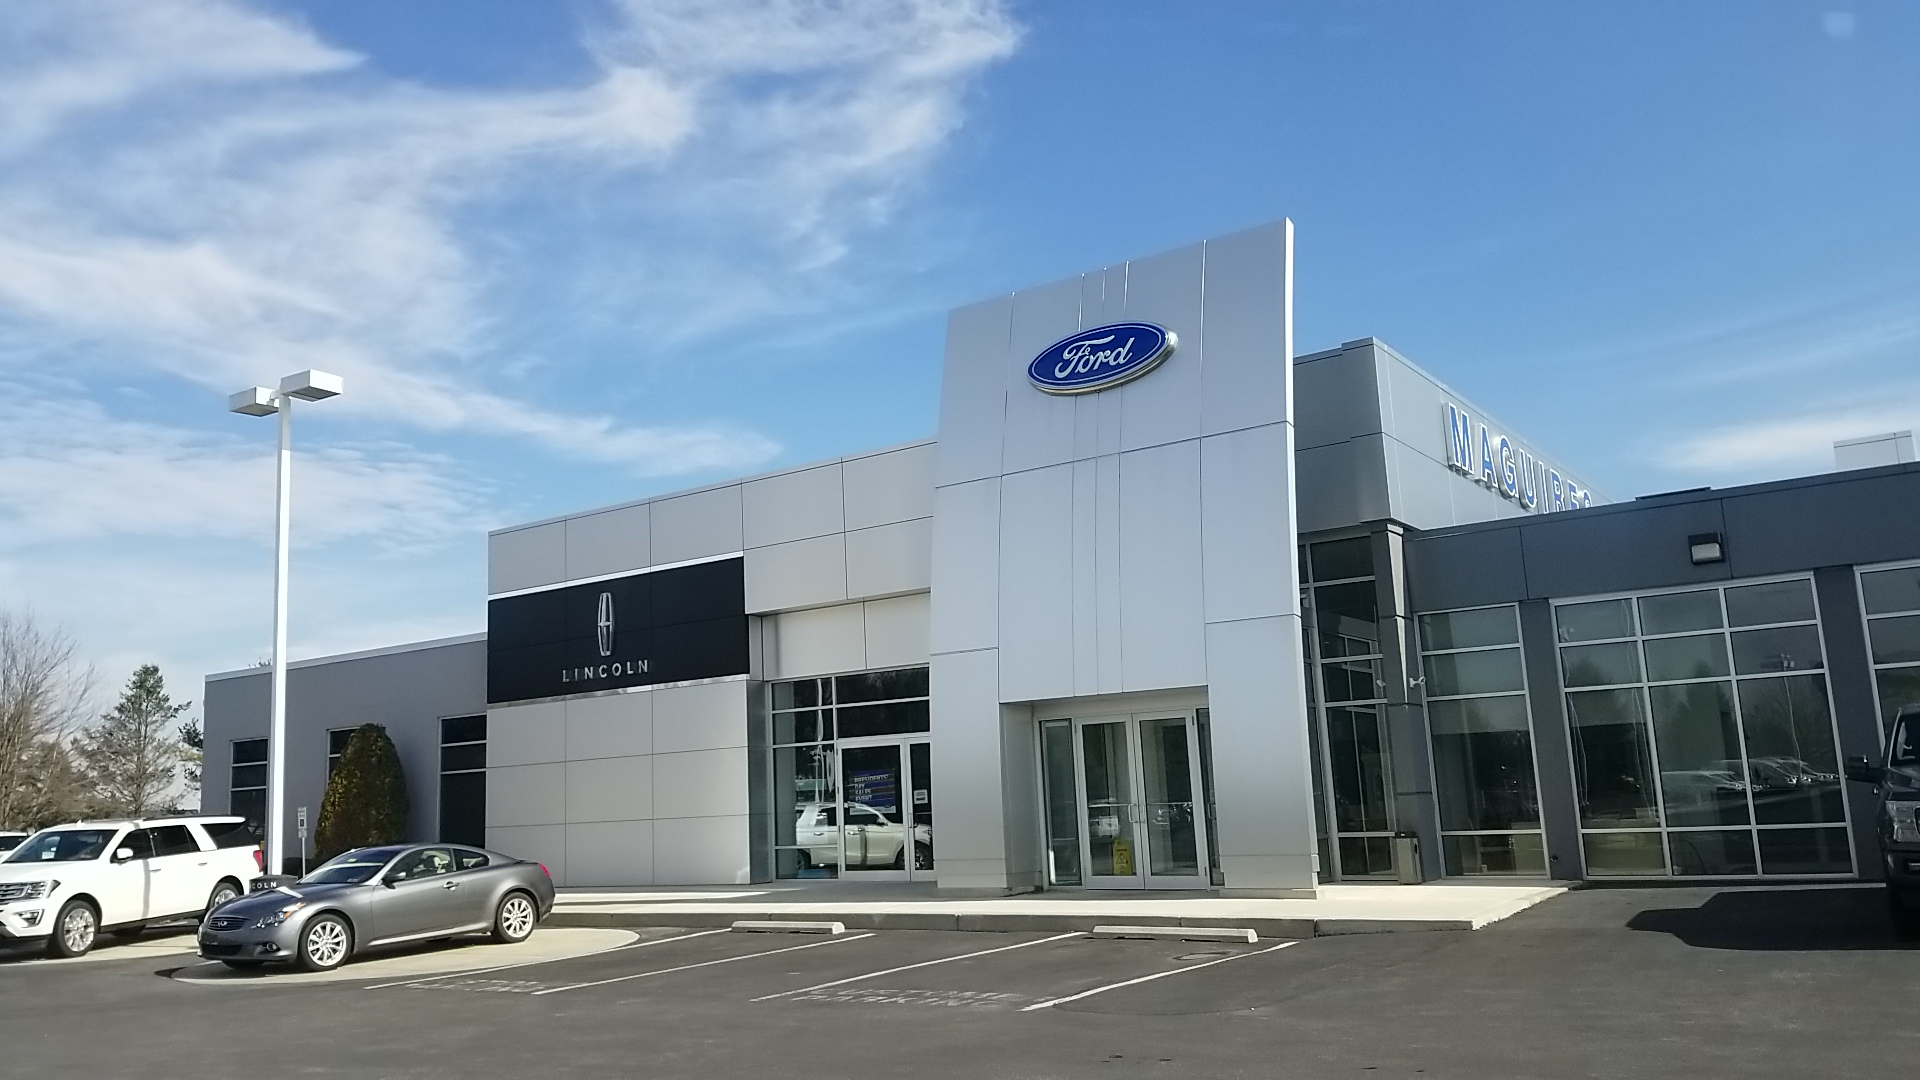 Maguire's Ford East